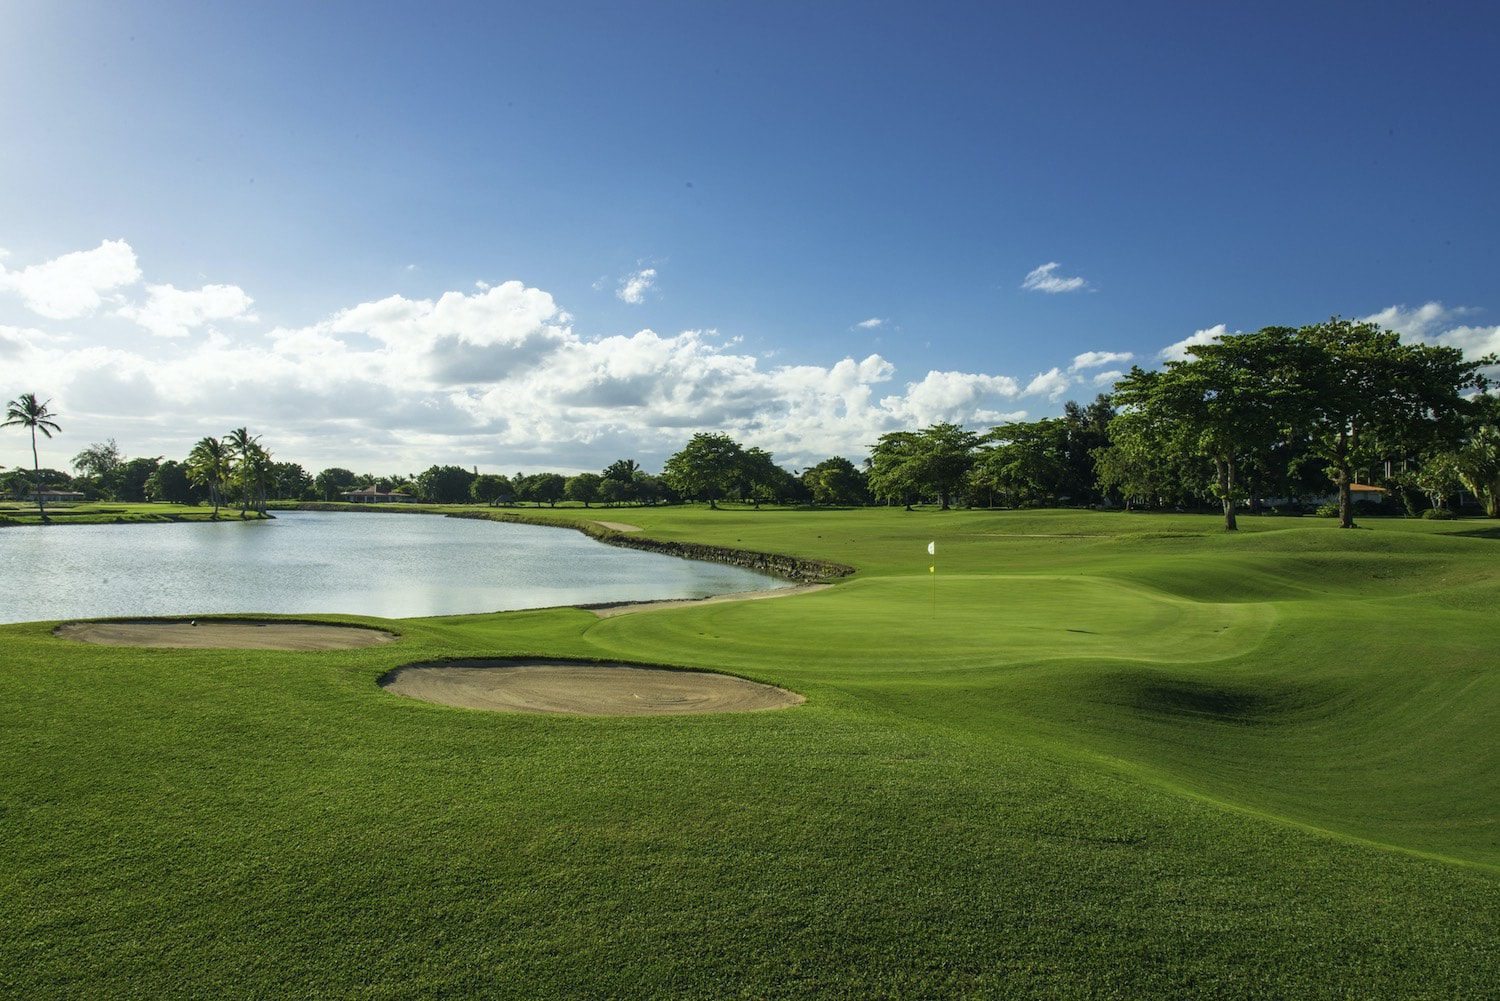 The Links Golf Course in the Caribbean